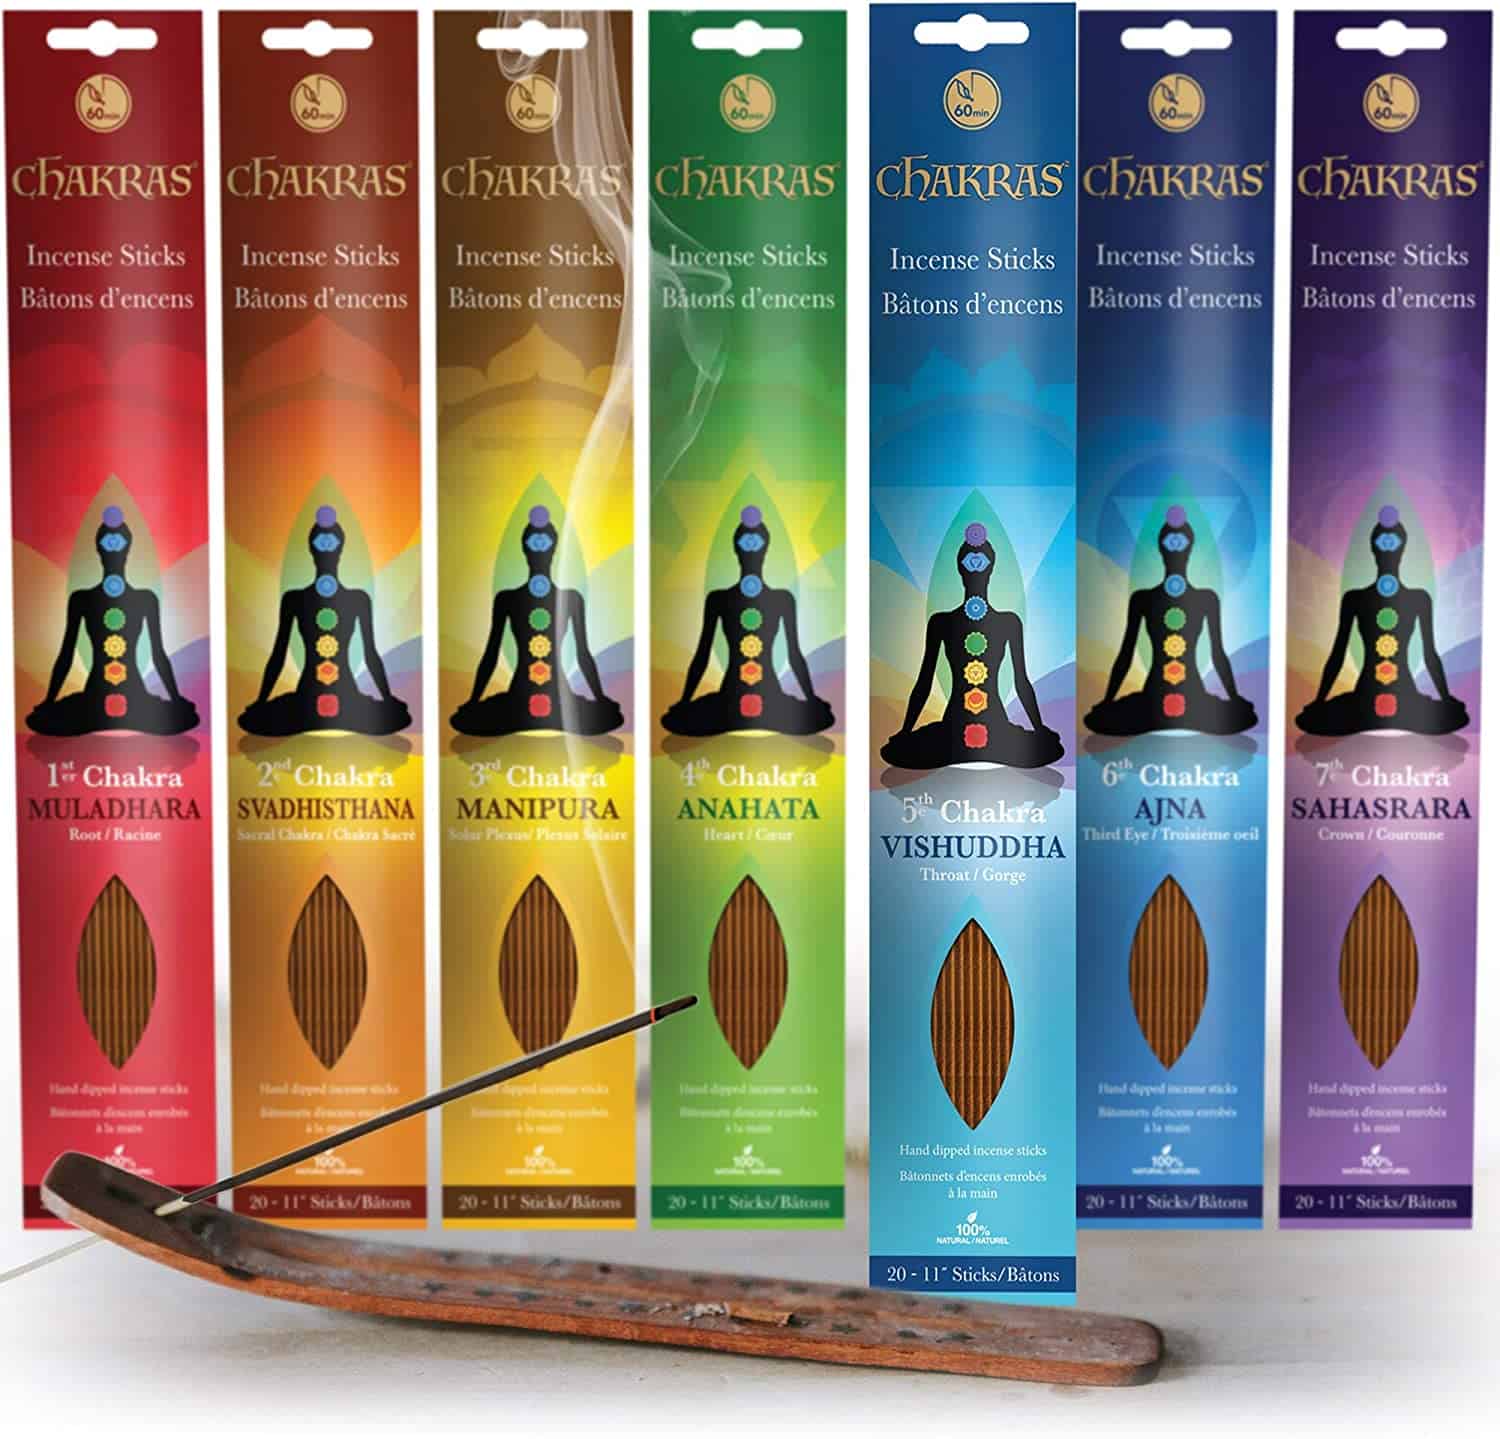 Chakras Incense Sticks, Perfect For Meditation, Reiki, Yoga, Relaxation, & Healing. Natural Hand Dipped Incense Variety Set, Cleanse & Purify Your Space.